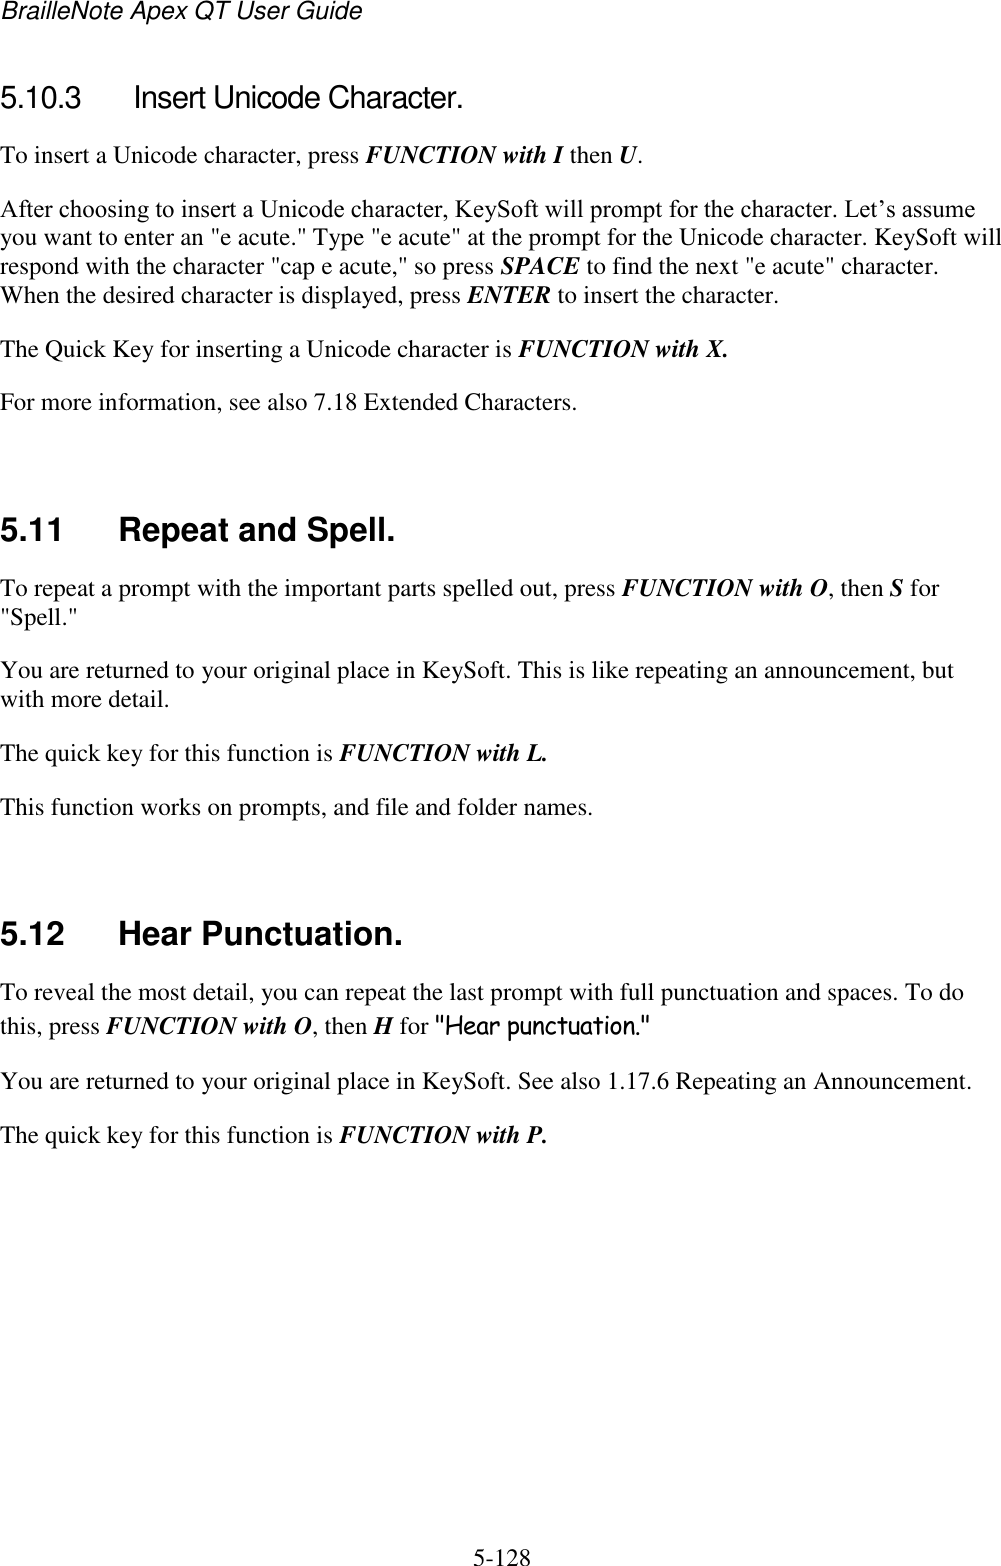 BrailleNote Apex QT User Guide  5-128   5.10.3  Insert Unicode Character. To insert a Unicode character, press FUNCTION with I then U. After choosing to insert a Unicode character, KeySoft will prompt for the character. Let‟s assume you want to enter an &quot;e acute.&quot; Type &quot;e acute&quot; at the prompt for the Unicode character. KeySoft will respond with the character &quot;cap e acute,&quot; so press SPACE to find the next &quot;e acute&quot; character. When the desired character is displayed, press ENTER to insert the character. The Quick Key for inserting a Unicode character is FUNCTION with X. For more information, see also 7.18 Extended Characters.   5.11  Repeat and Spell. To repeat a prompt with the important parts spelled out, press FUNCTION with O, then S for &quot;Spell.&quot; You are returned to your original place in KeySoft. This is like repeating an announcement, but with more detail. The quick key for this function is FUNCTION with L. This function works on prompts, and file and folder names.   5.12  Hear Punctuation. To reveal the most detail, you can repeat the last prompt with full punctuation and spaces. To do this, press FUNCTION with O, then H for &quot;Hear punctuation.&quot; You are returned to your original place in KeySoft. See also 1.17.6 Repeating an Announcement. The quick key for this function is FUNCTION with P.   